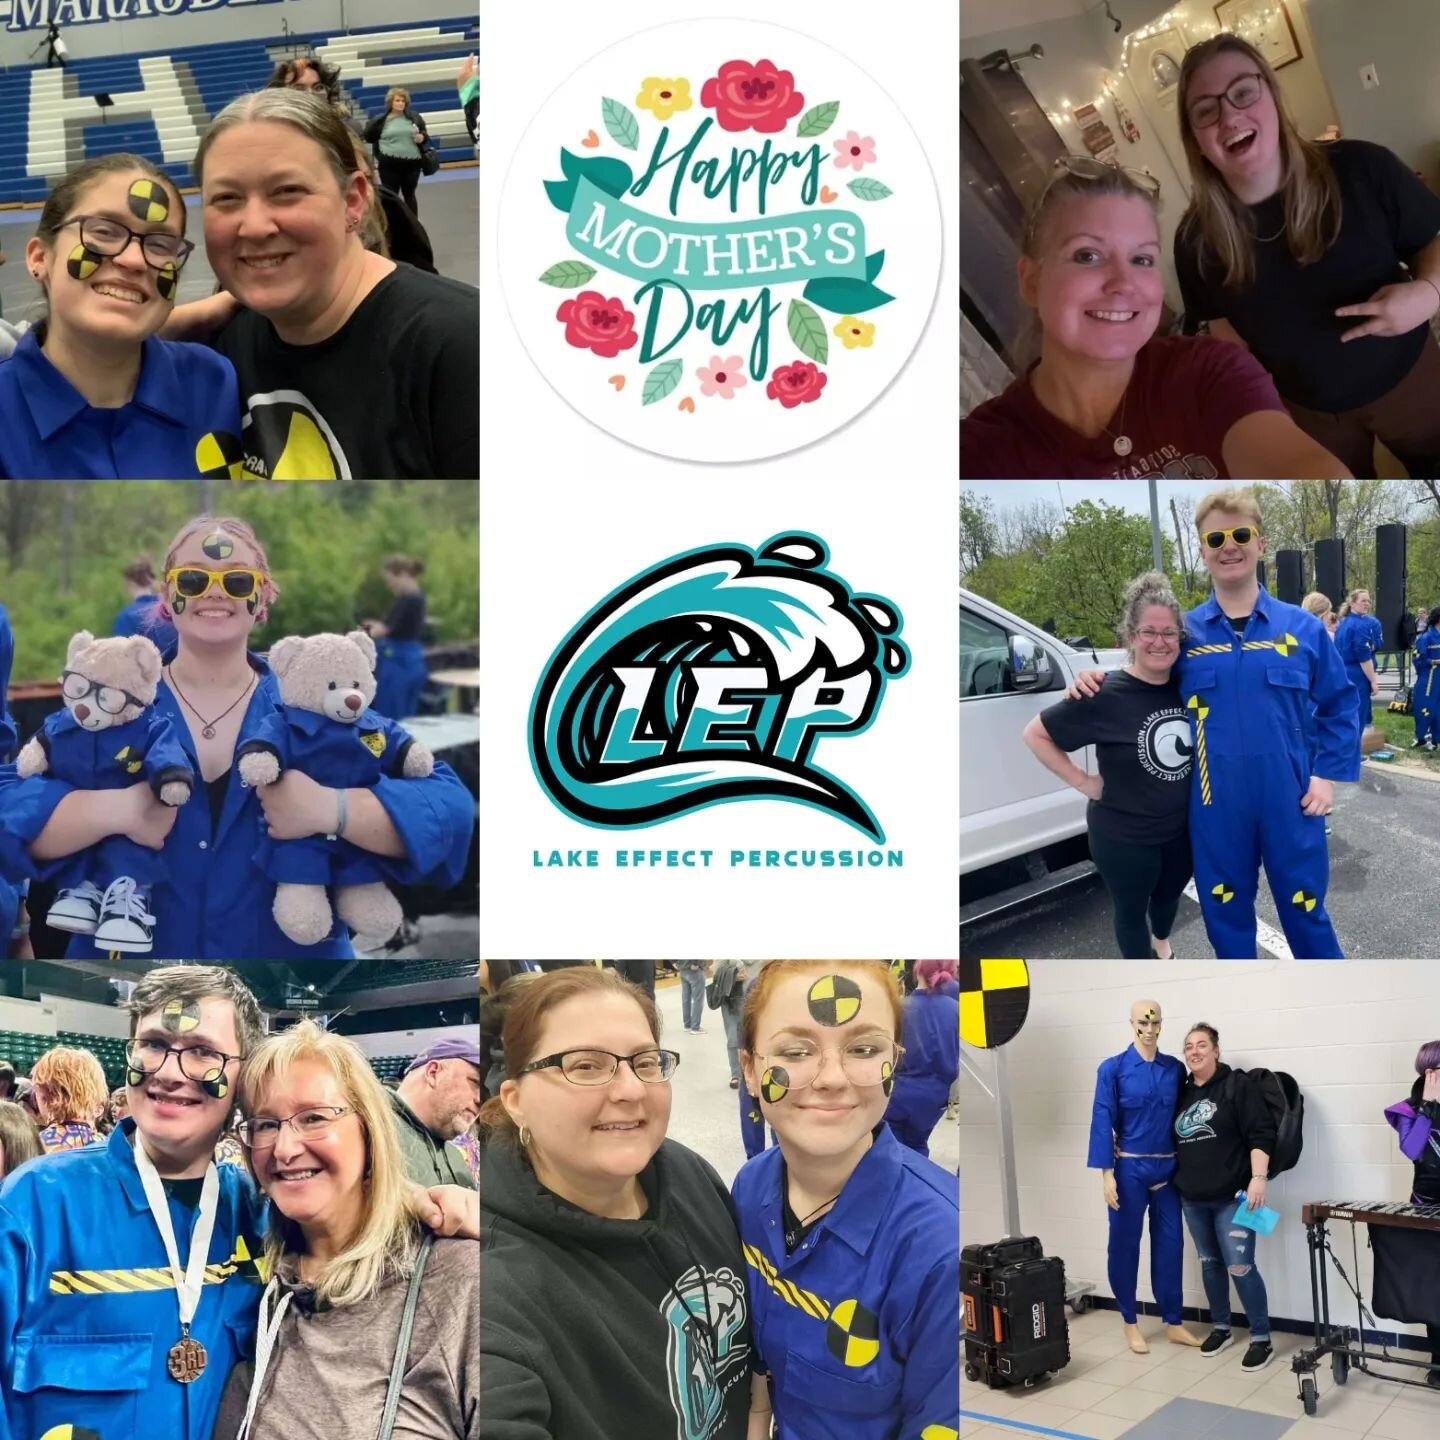 Happy Mother's Day to all the Band Mom's! The band world cannot run without you 💙
.
.
.
#LEP #mothersday